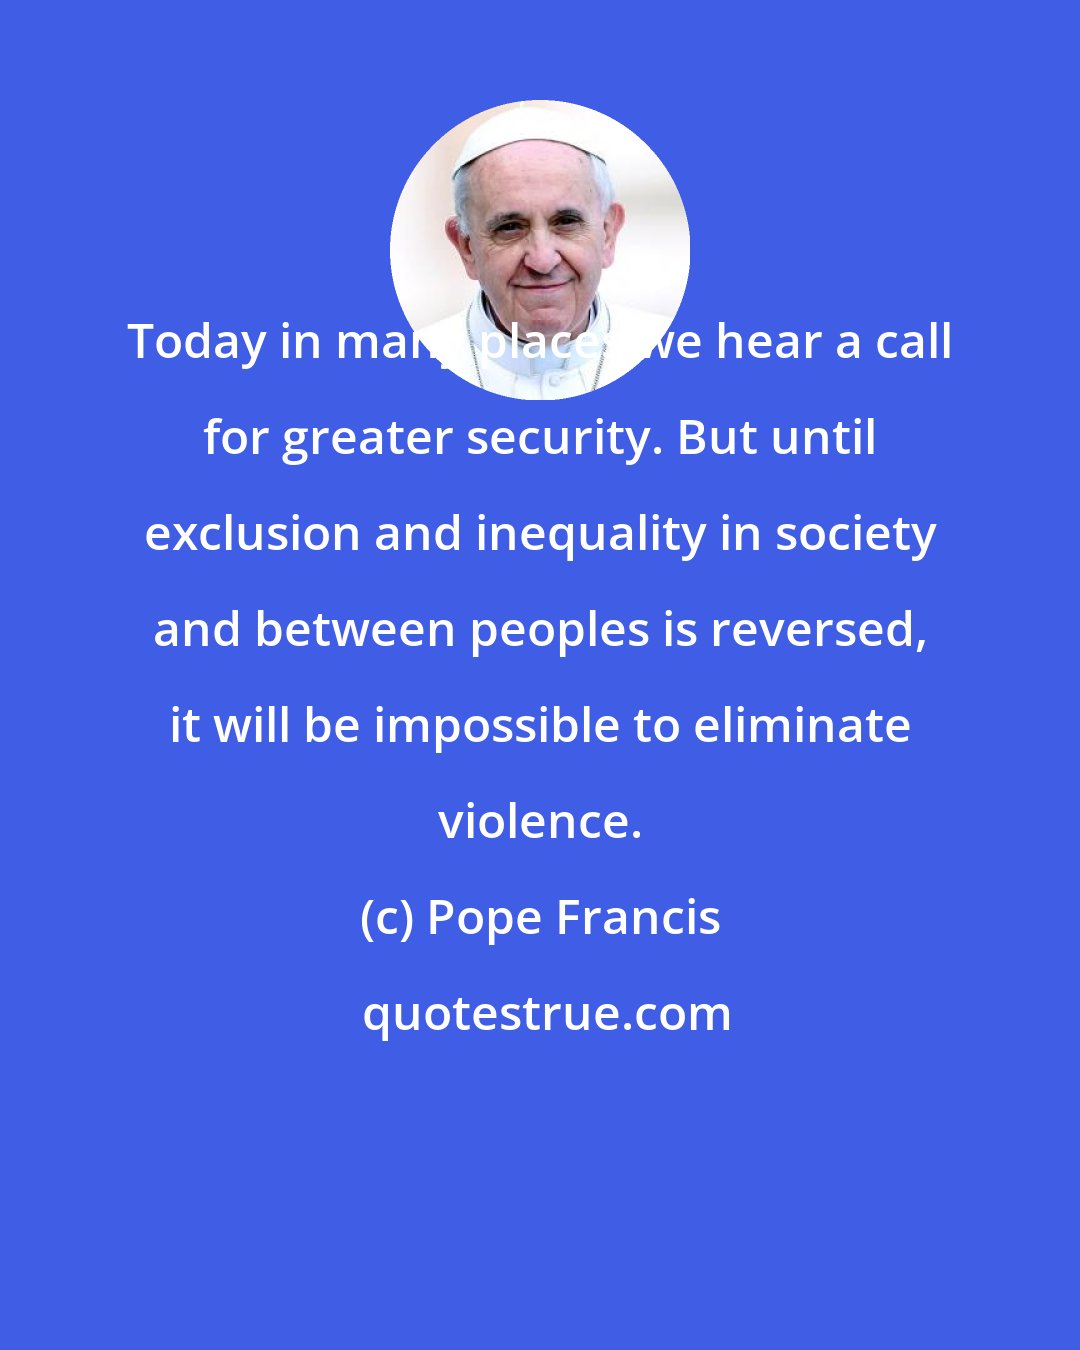 Pope Francis: Today in many places we hear a call for greater security. But until exclusion and inequality in society and between peoples is reversed, it will be impossible to eliminate violence.